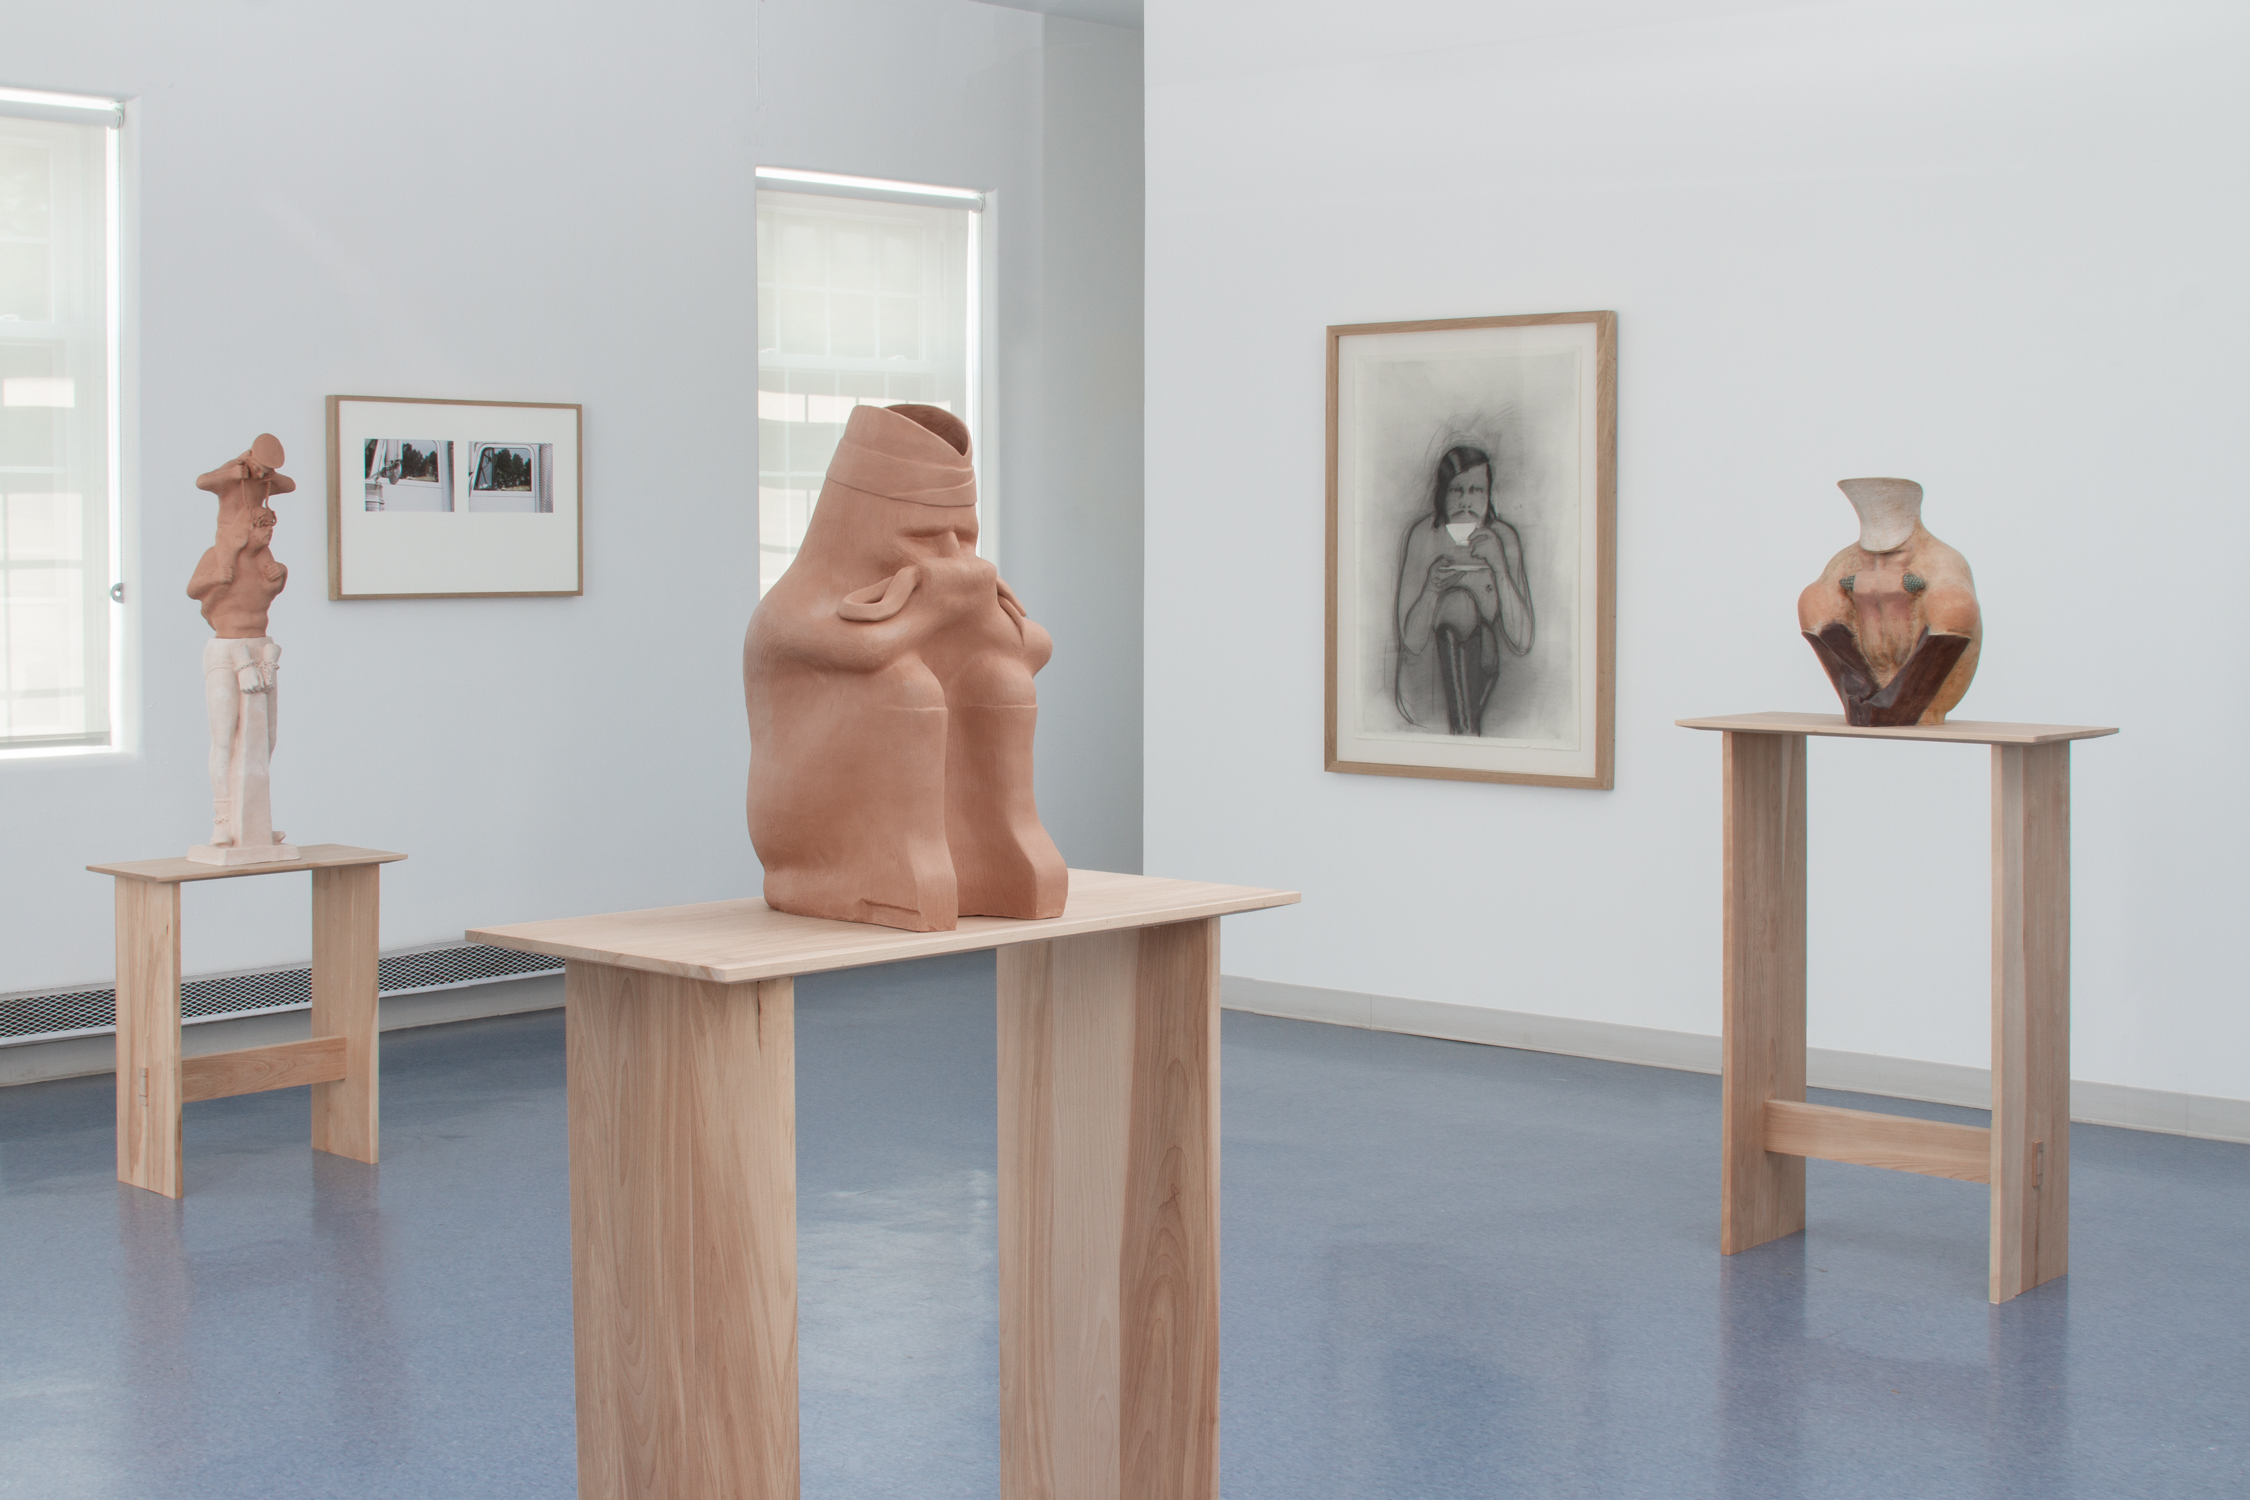 A gallery view of the show. There are three sculptures on wooden tables. There are two photographs in one wooden frame and a charcoal drawing in another.